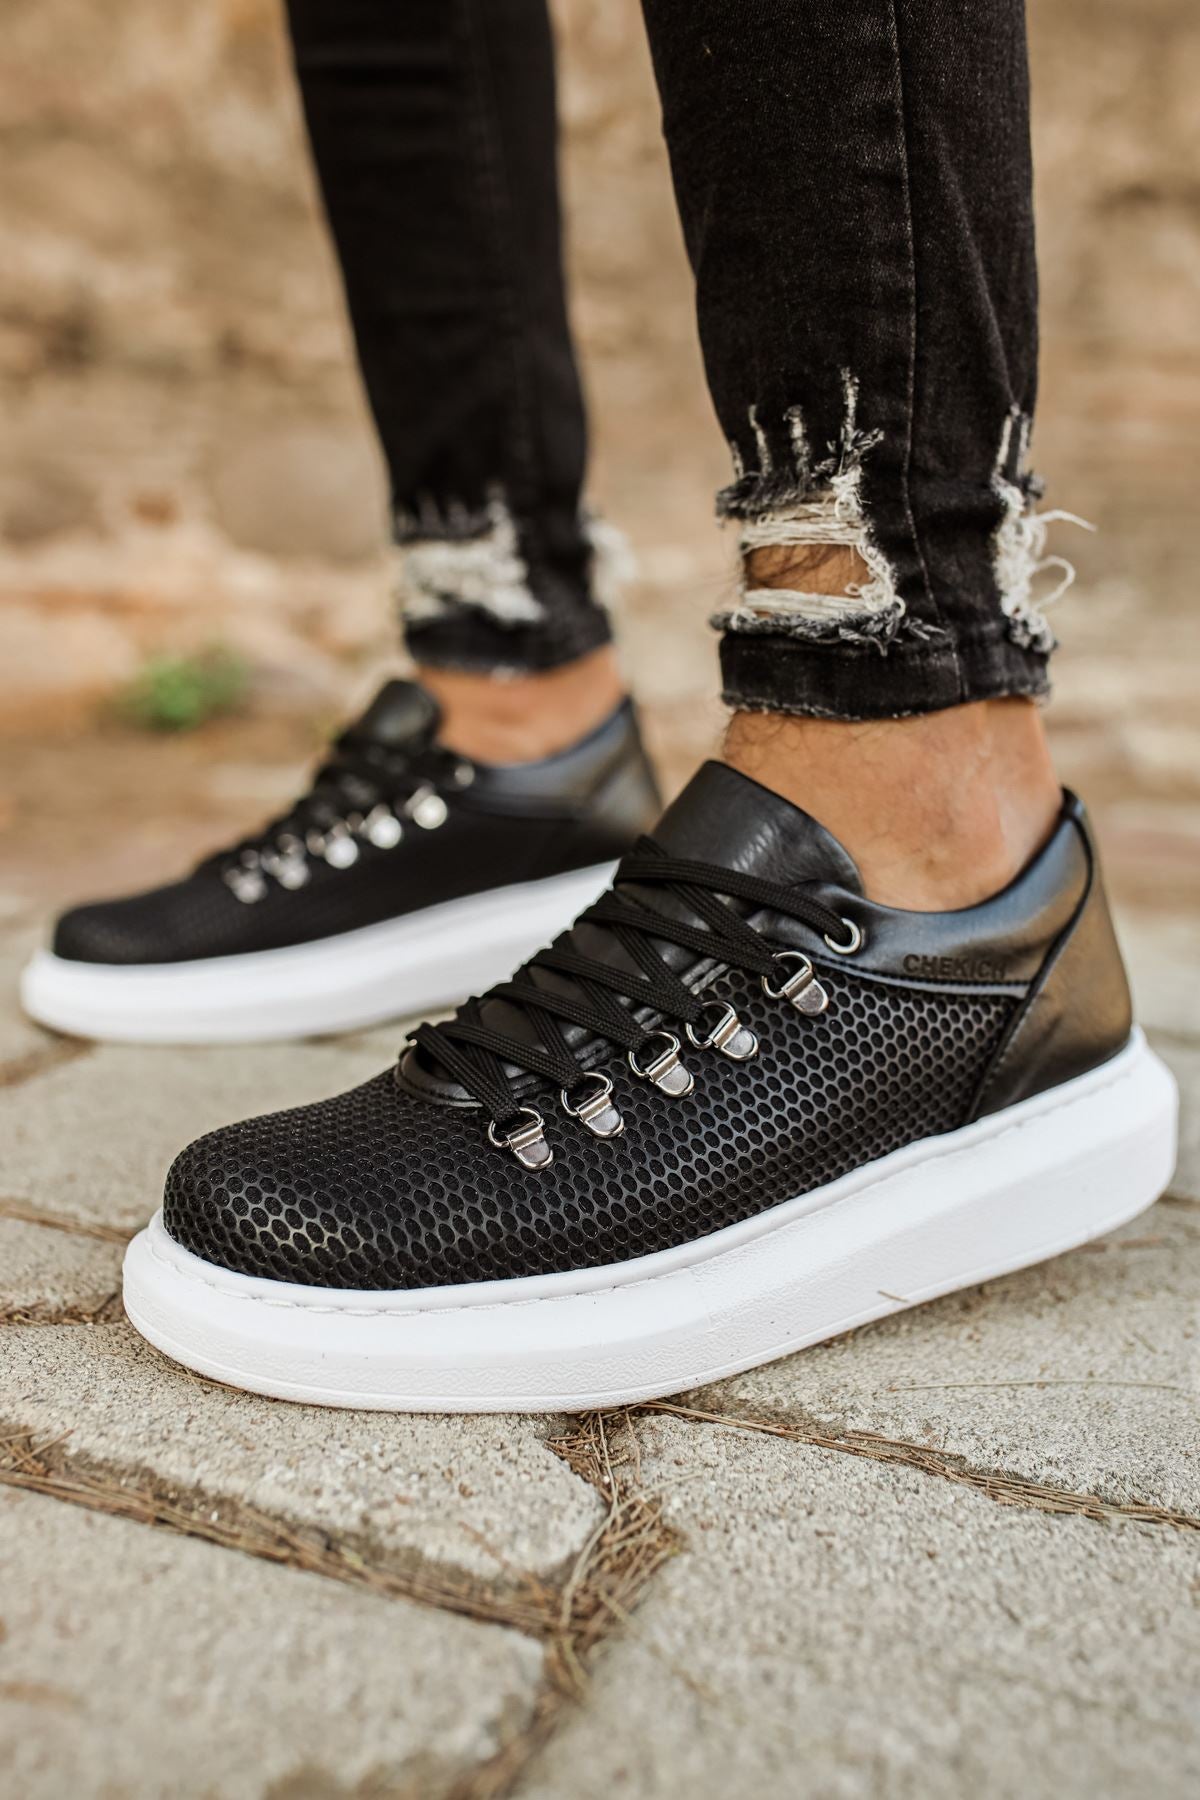 CH021 Men's Unisex Black-White Sole Honeycomb Processing Casual Sneaker Sports Shoes - STREETMODE ™